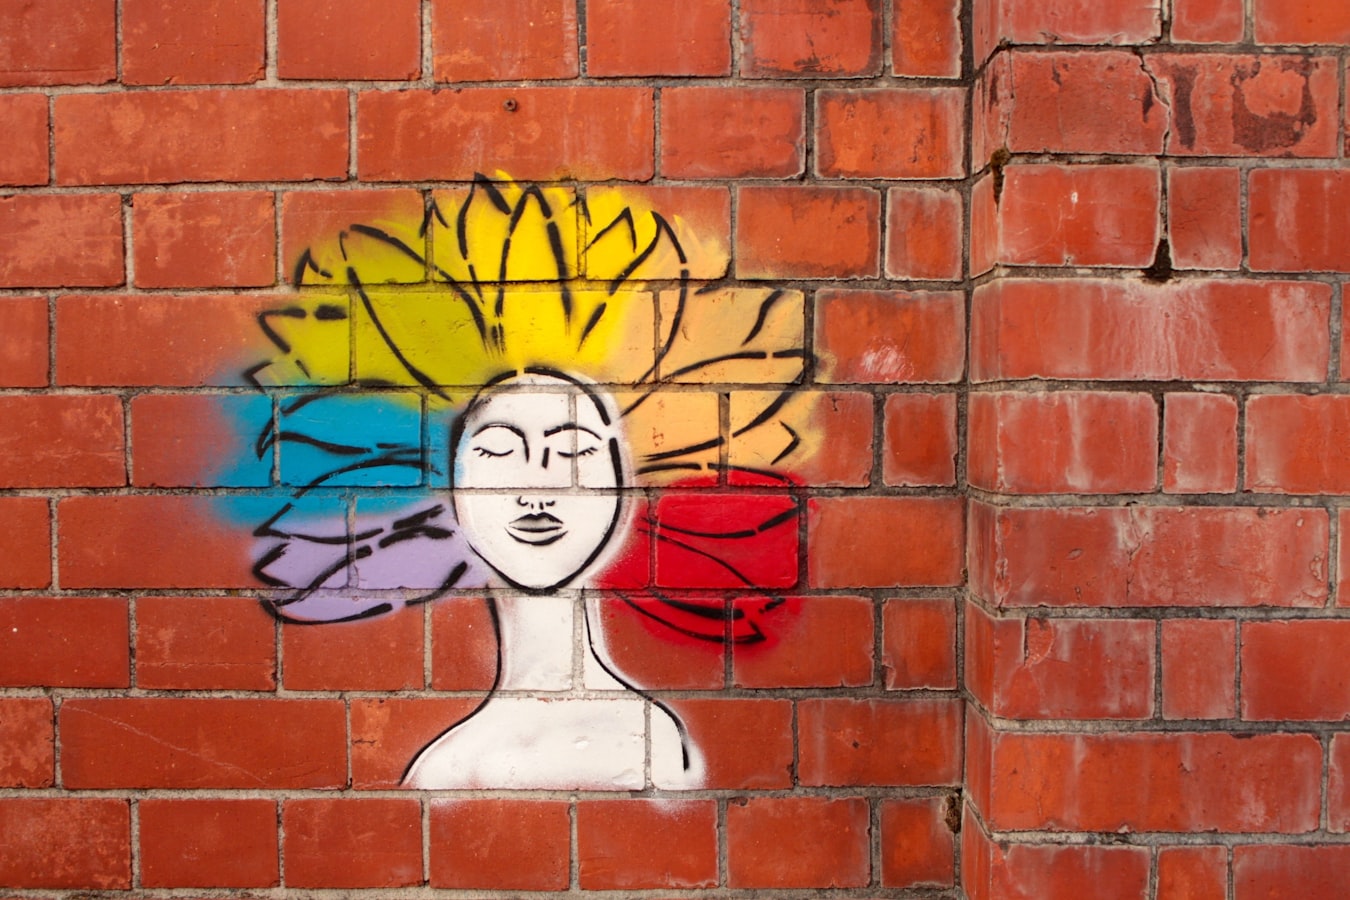 paint spray art of woman on brown brick wall